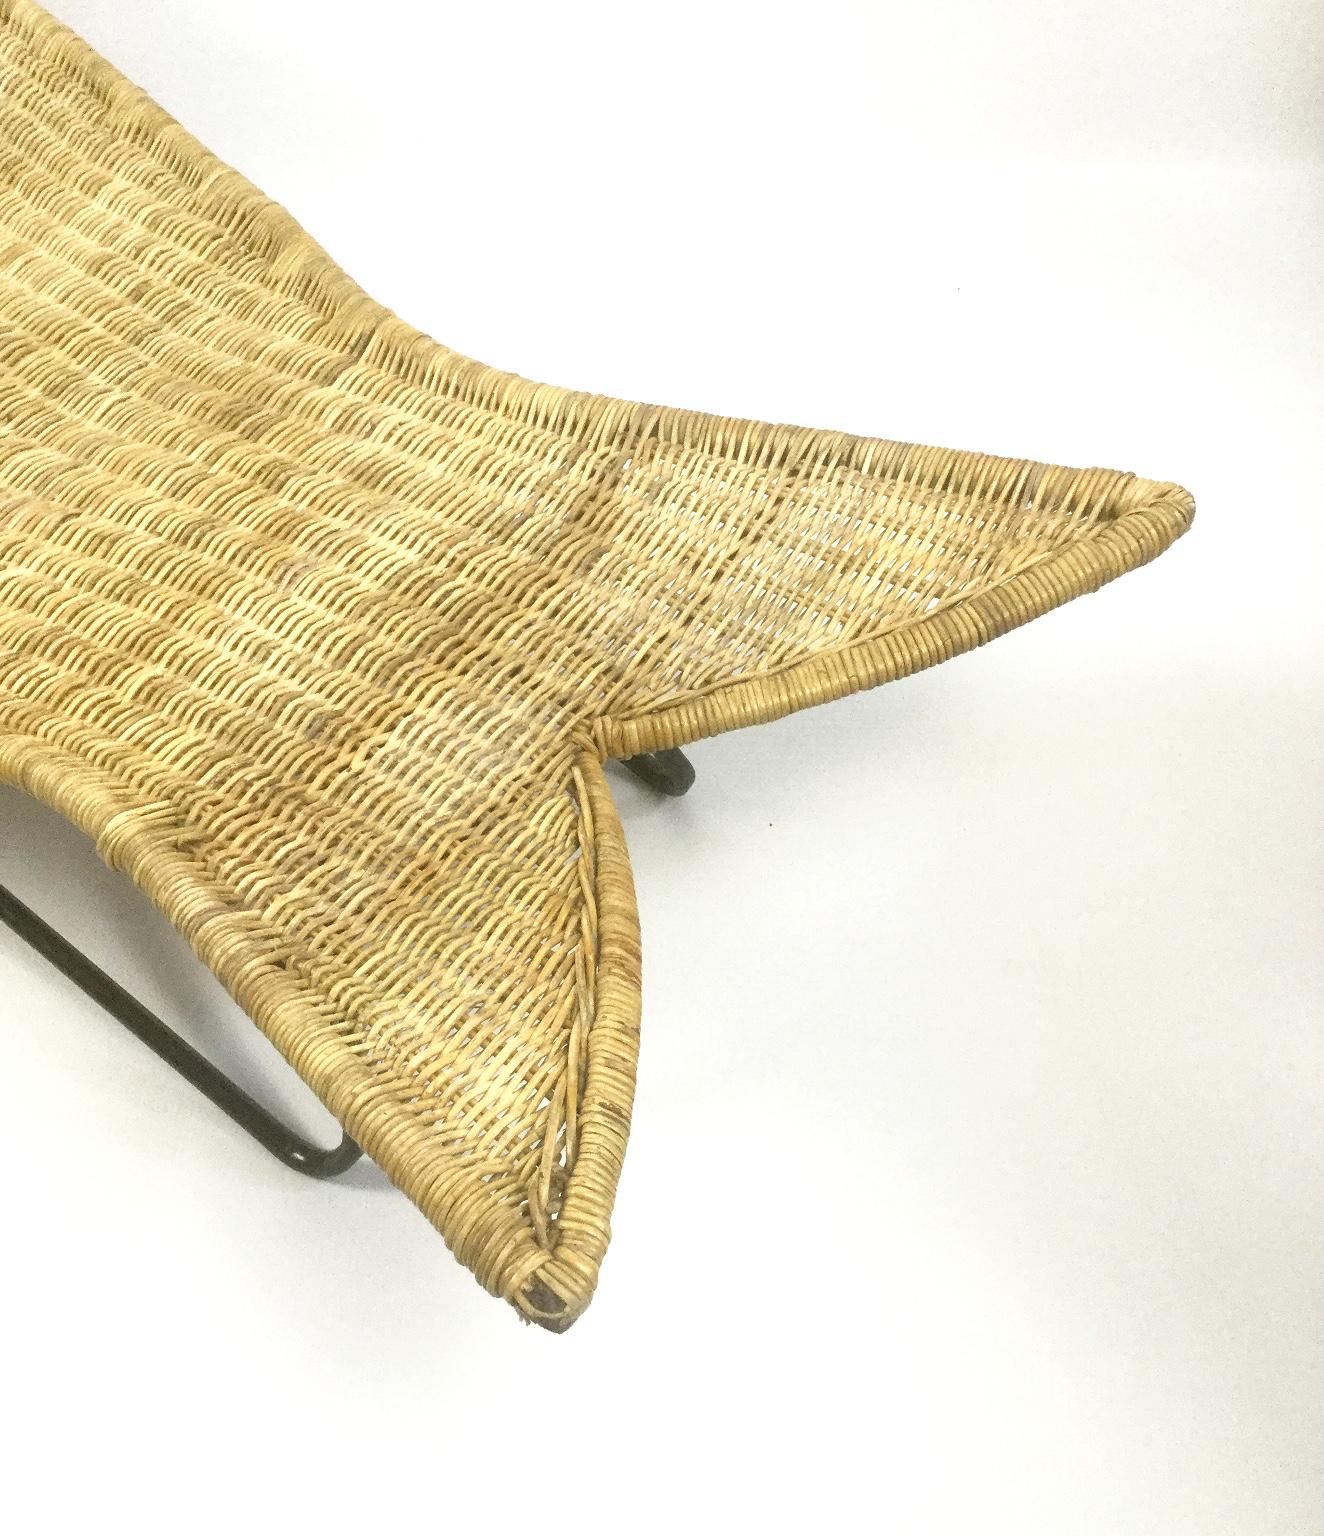 French Fish Shaped Wicker Lounge Chair Attributed to Lina Zervudaki, 1940s